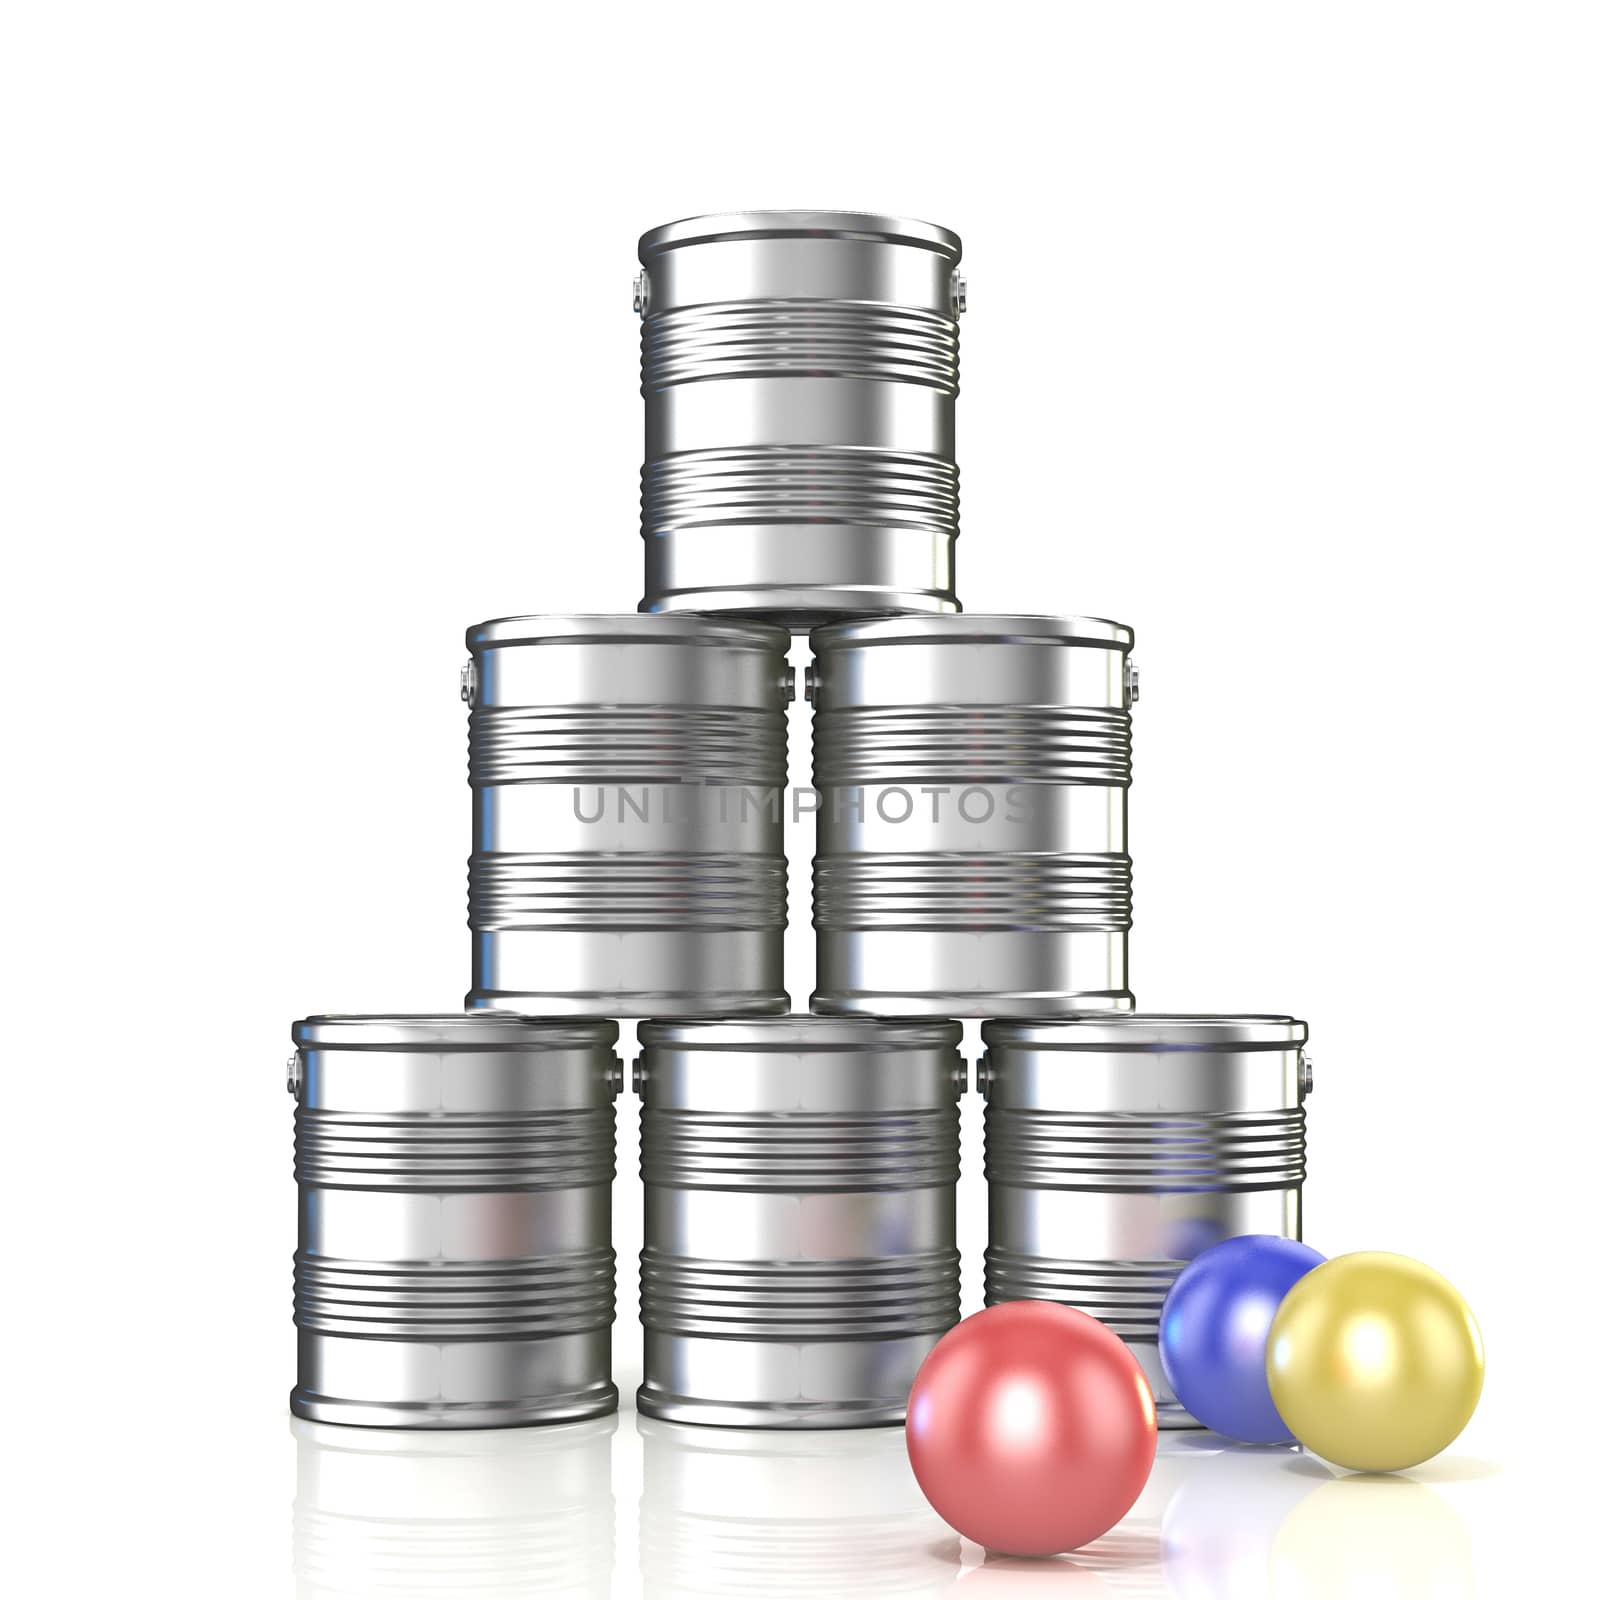 Tin cans and three balls. 3D by djmilic